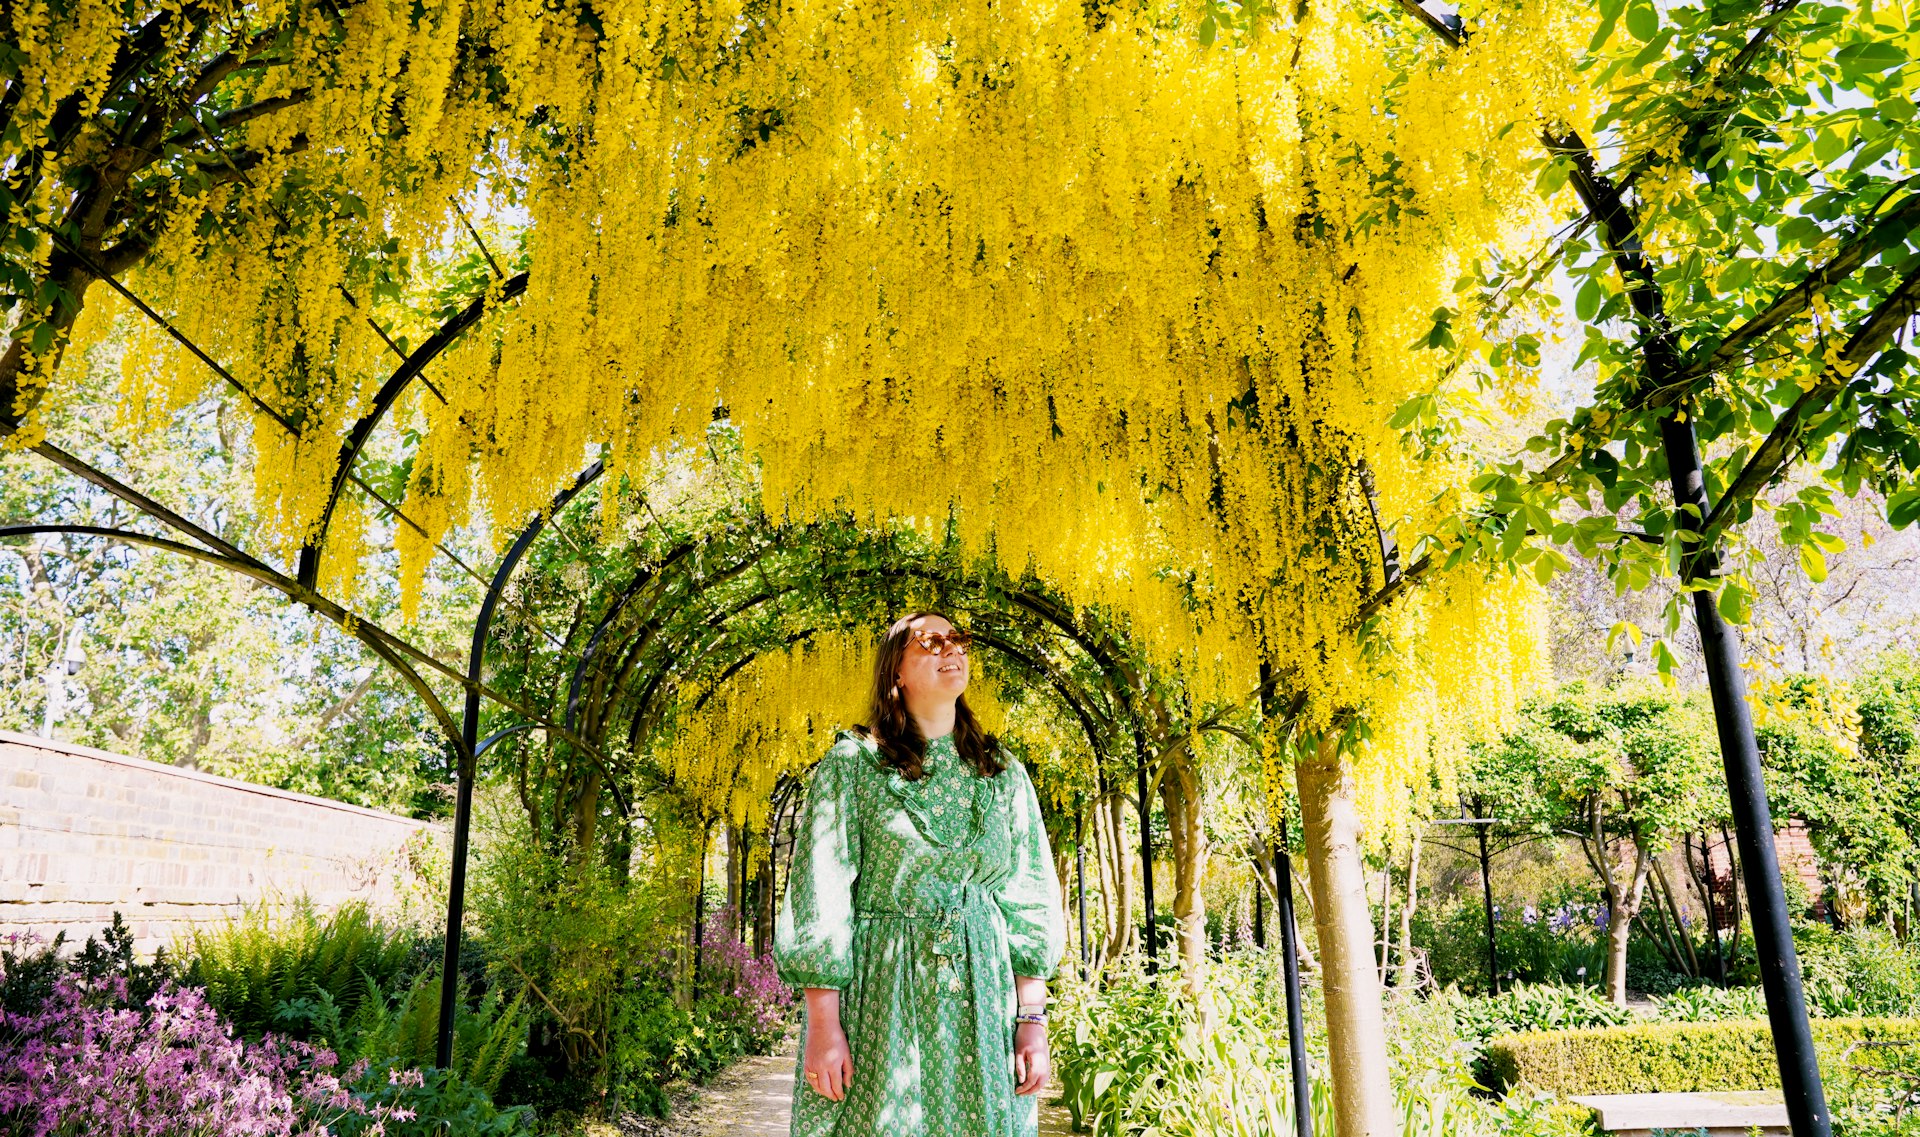 A visitor walks underneath an arch of blossoming Laburnum, sometimes called golden chain or golden rain, behind Kew Palace, in Kew Gardens, London